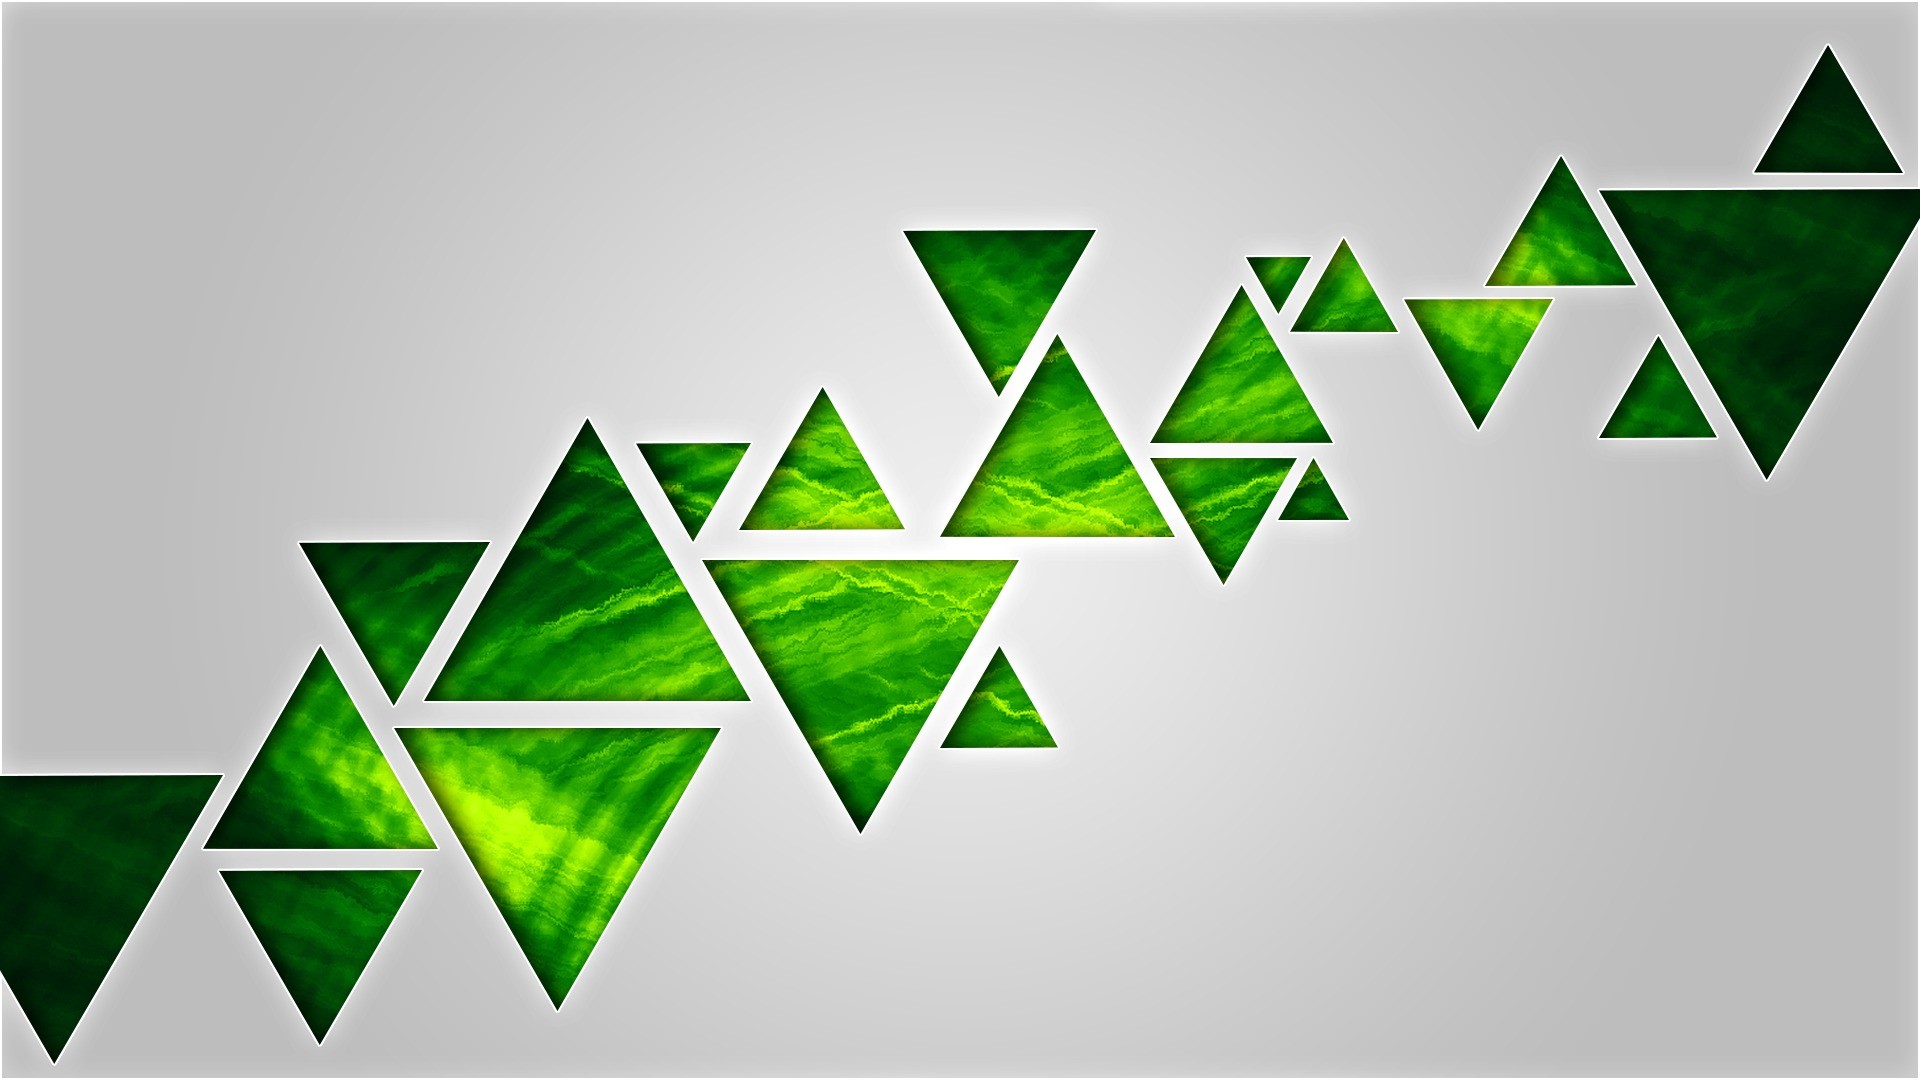 General 1920x1080 digital art simple background triangle green geometry abstract gray background geometric figures